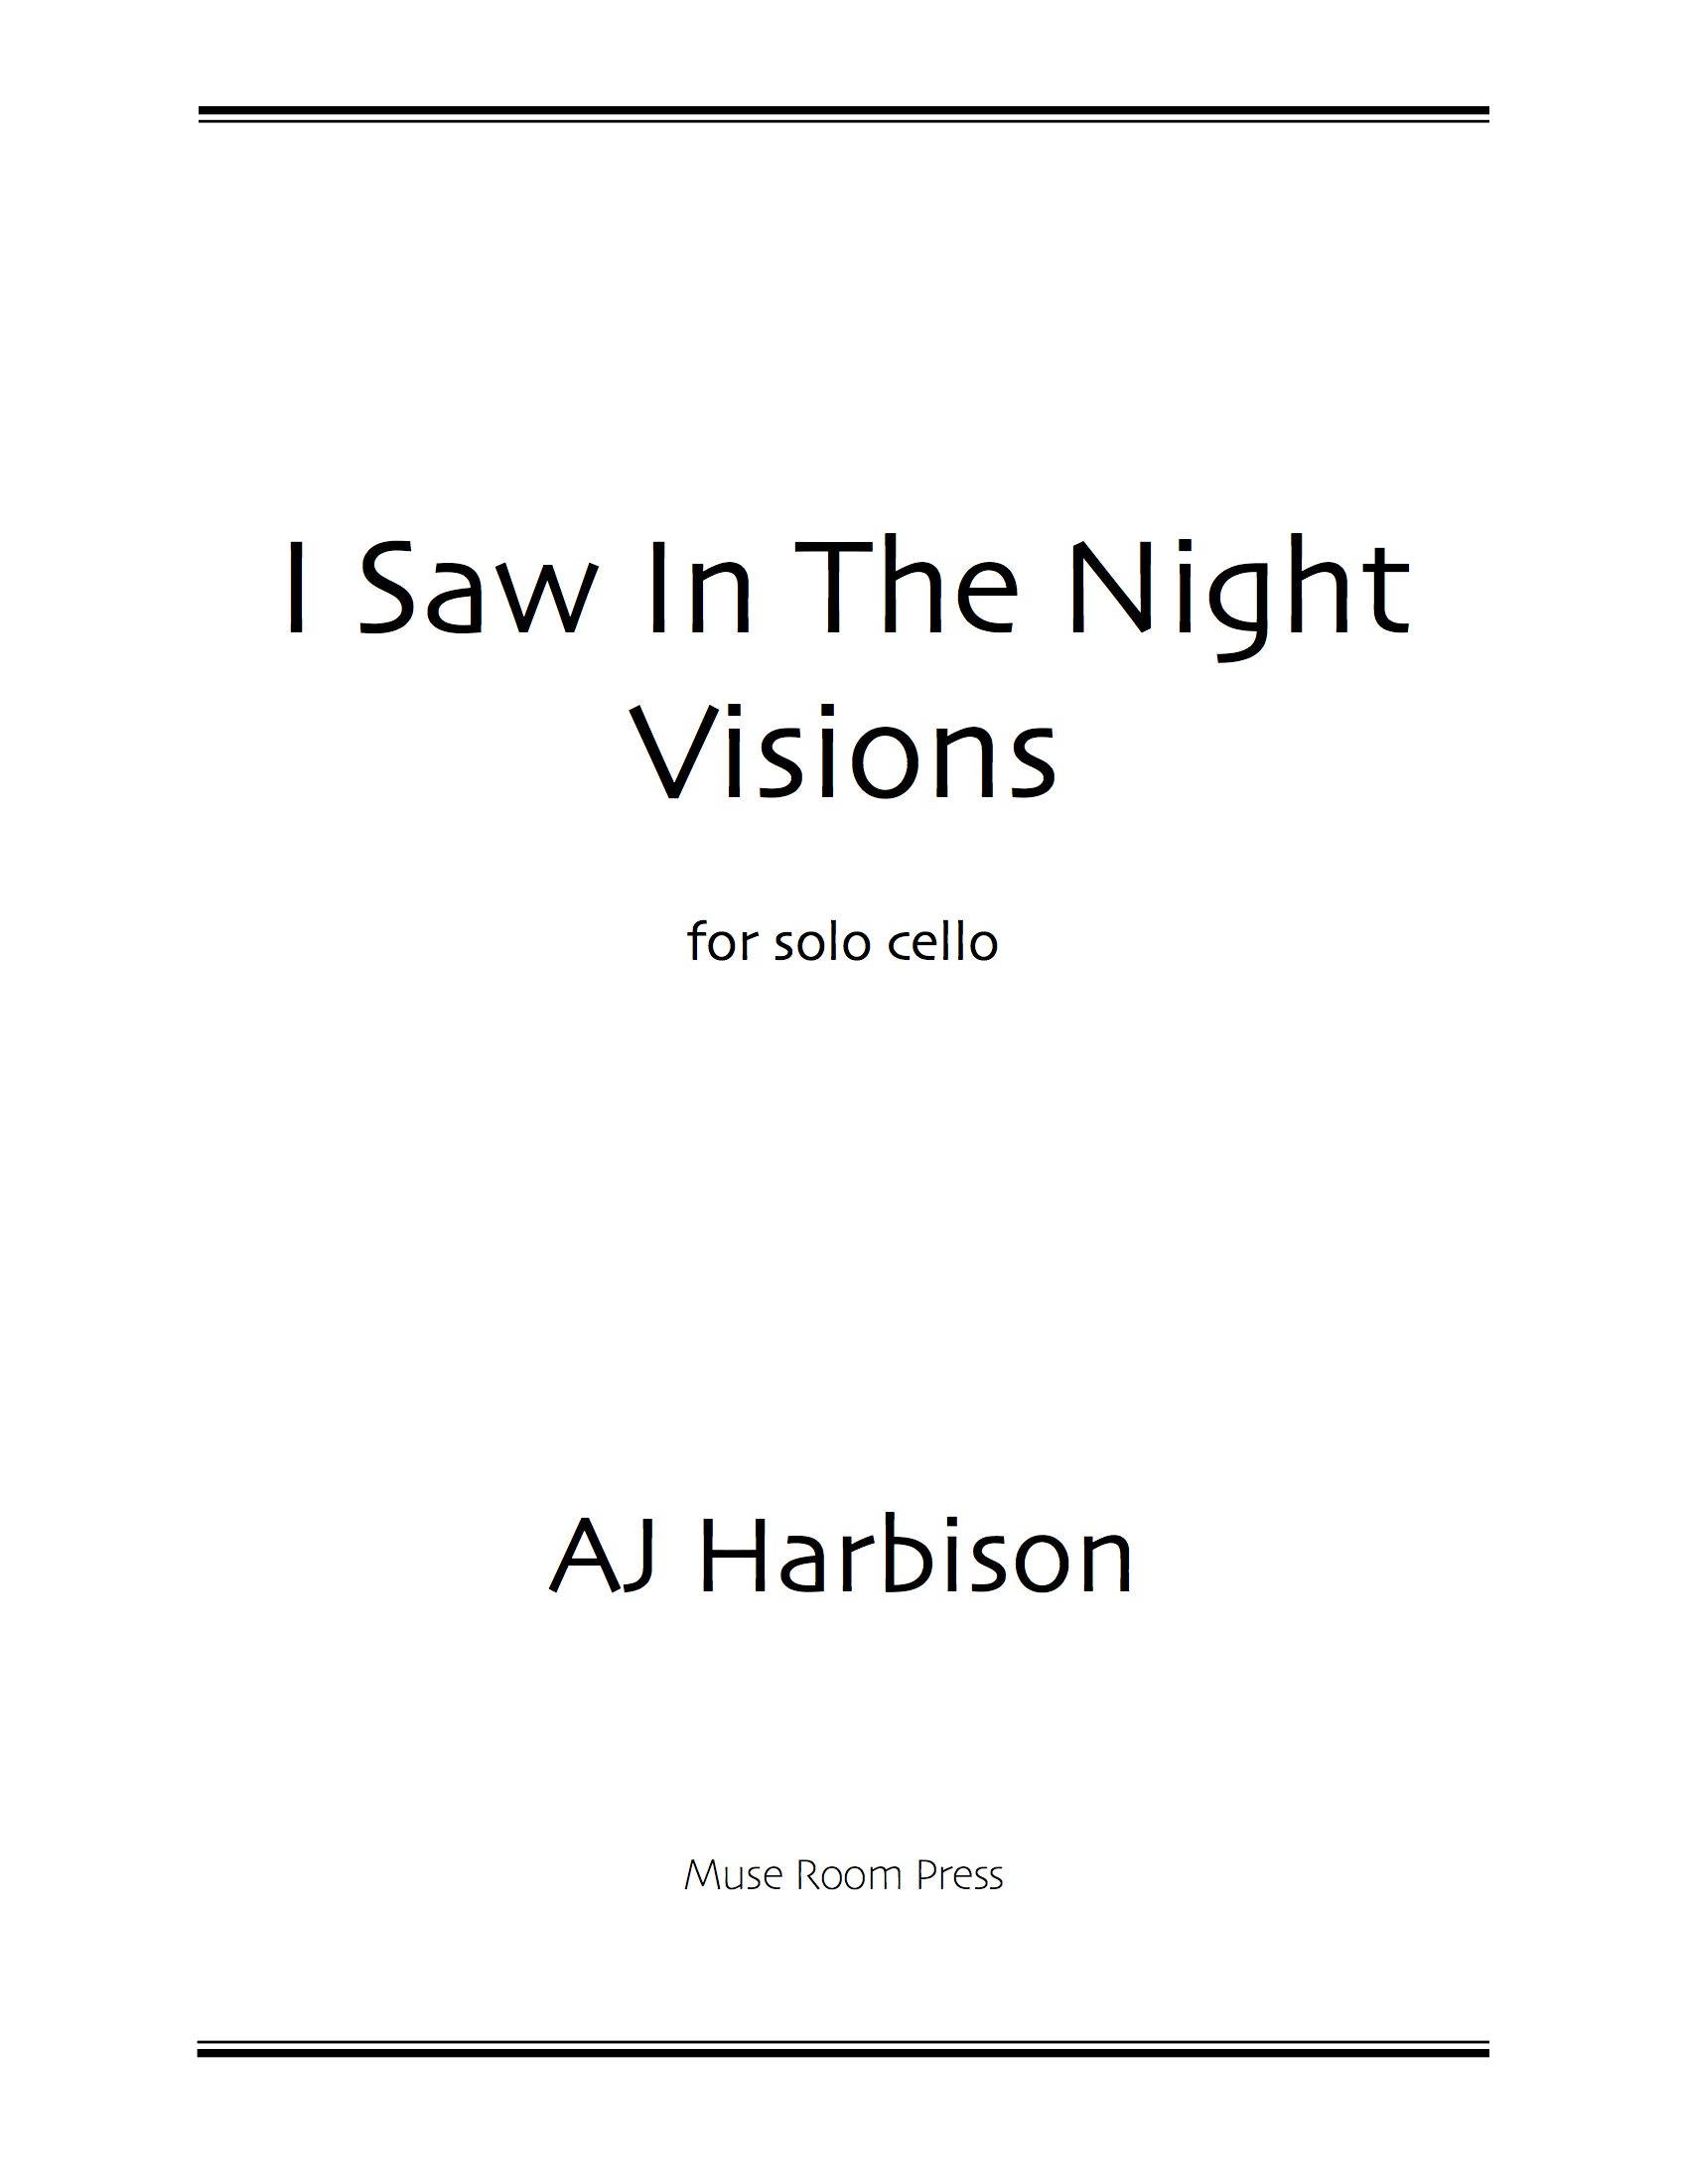 I Saw in the Night Visions